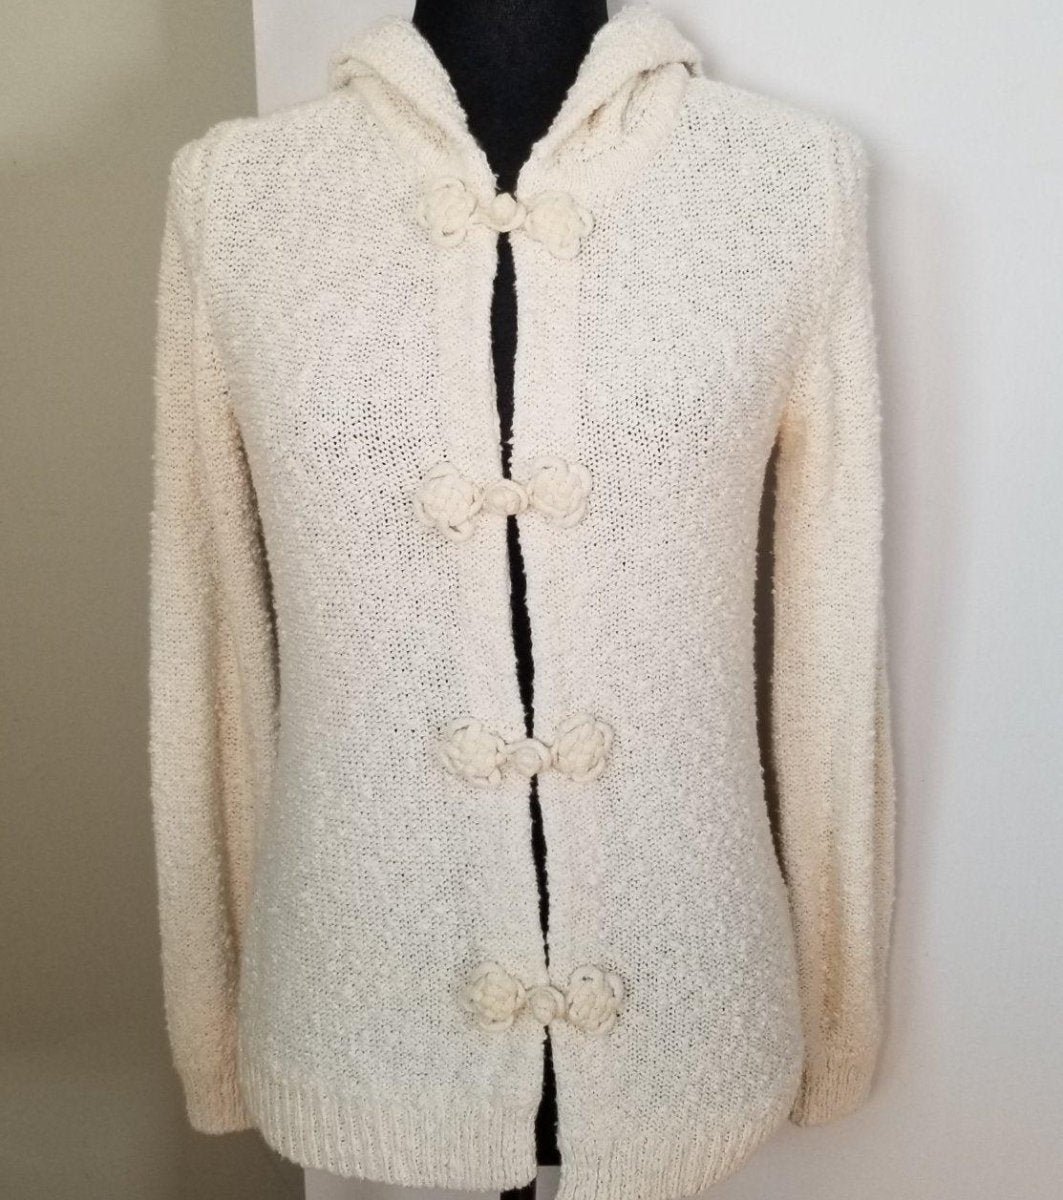 70s Hark Cream Boucle Knit Hooded Sweater Small - themallvintage The Mall Vintage